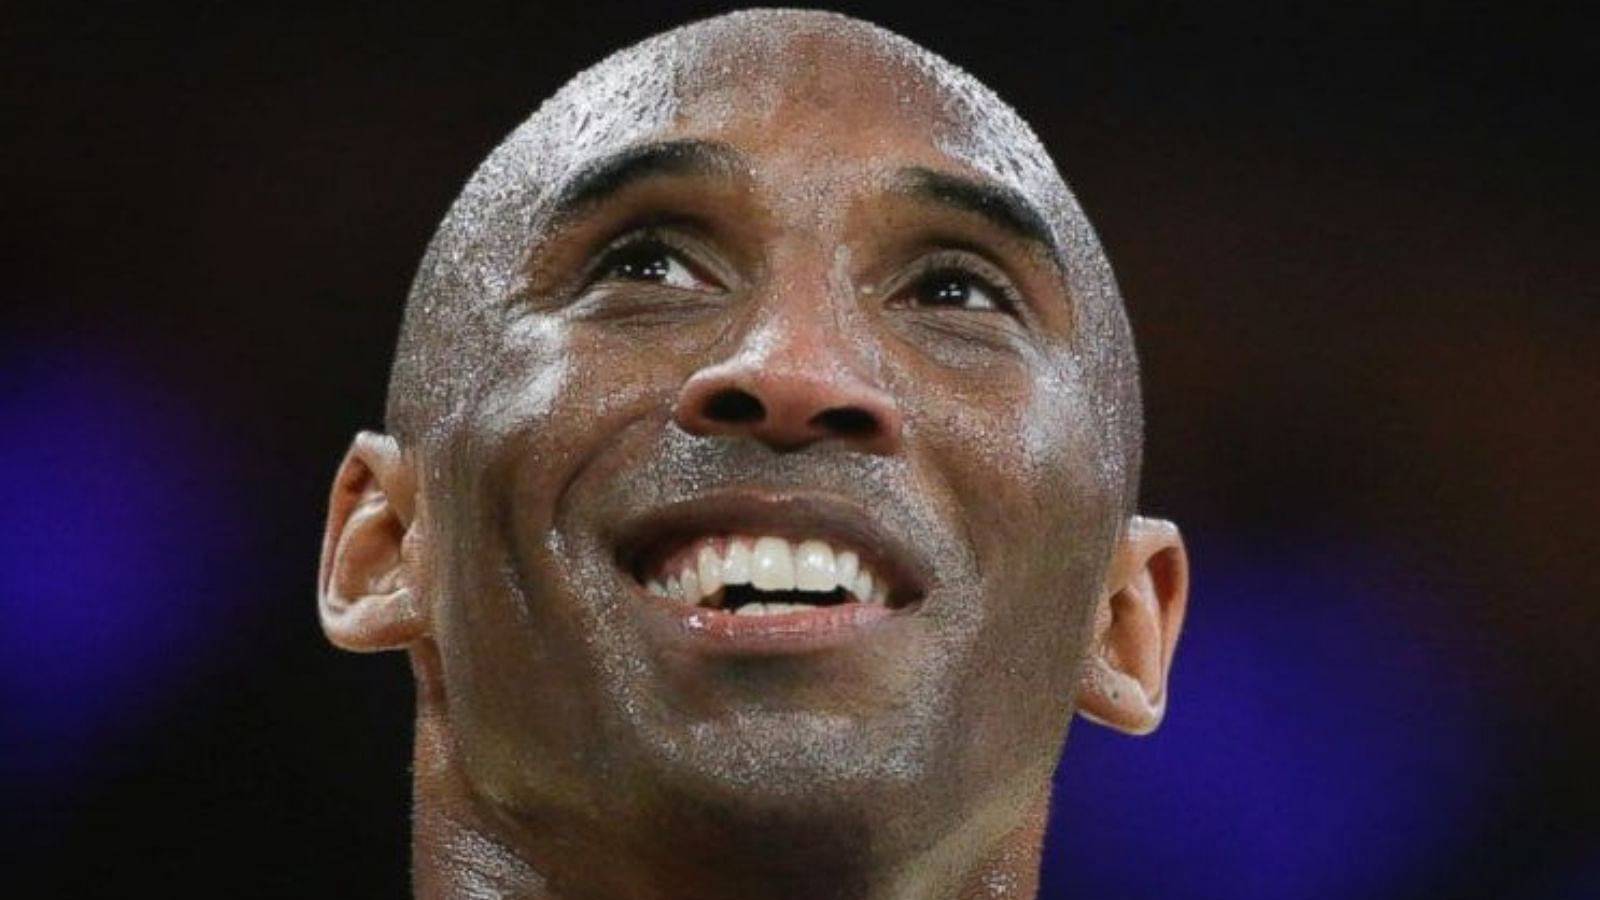 Kobe Bryant gave LeBron James’ $30M teammate ‘key to life’ by saying “Keep all your eggs in one basket and then buy some more”